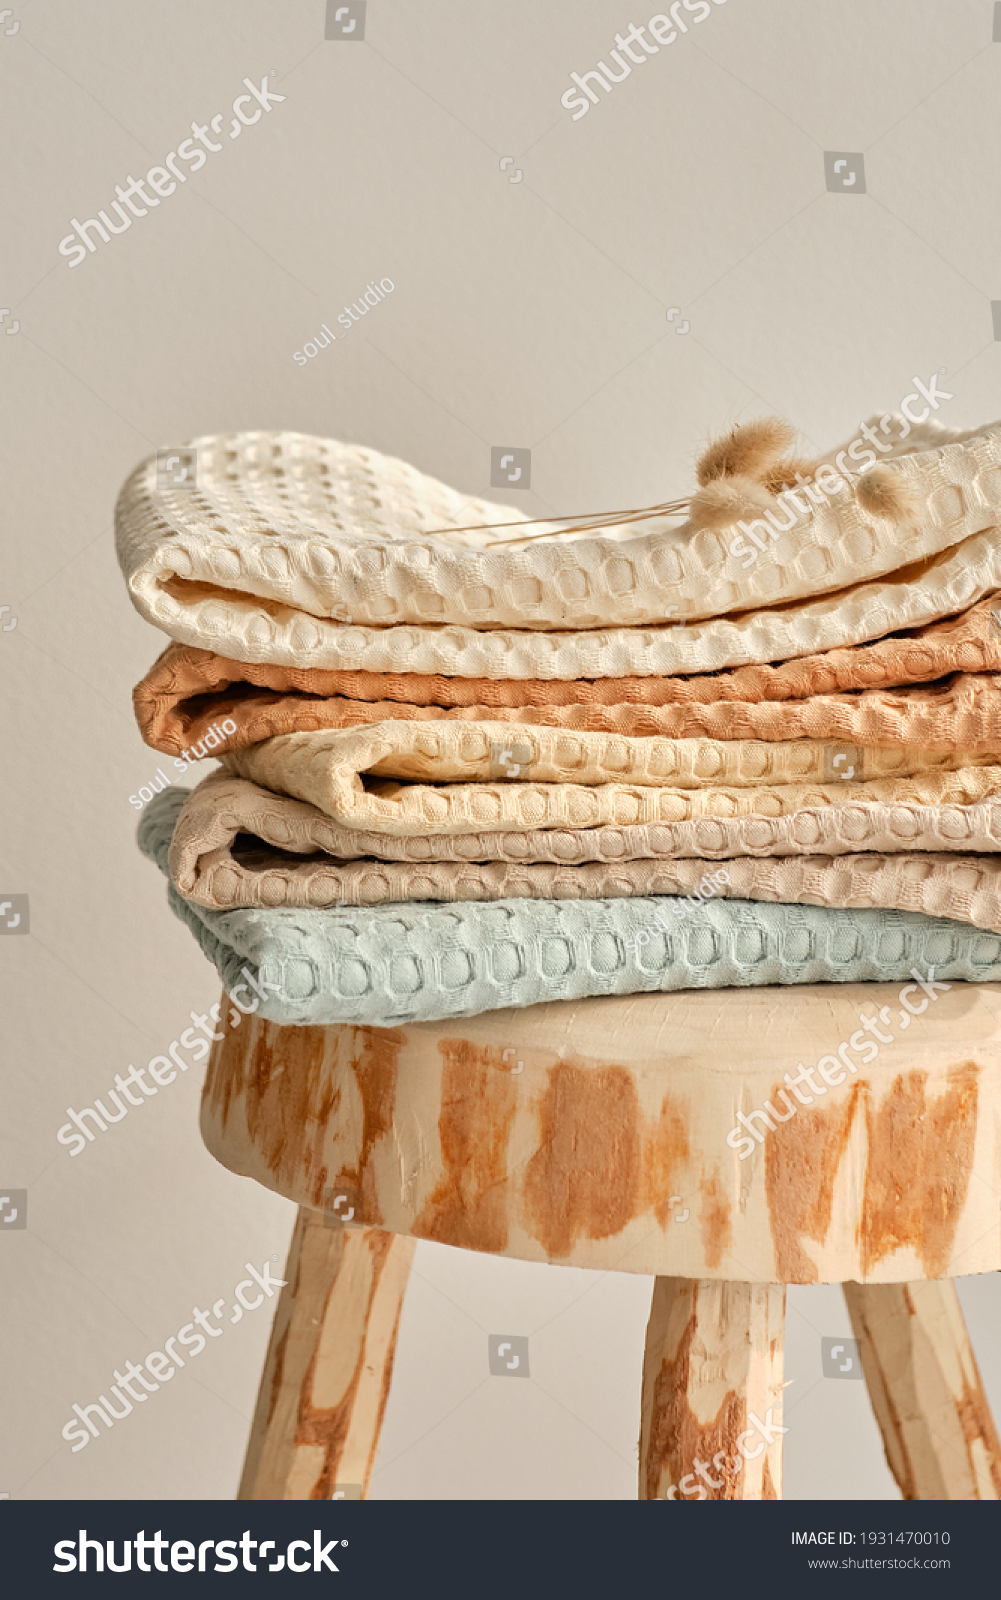 Collection of natural muslin towels lies on an unusual wooden stool. Natural, soft, airy and stylish home textiles. #1931470010